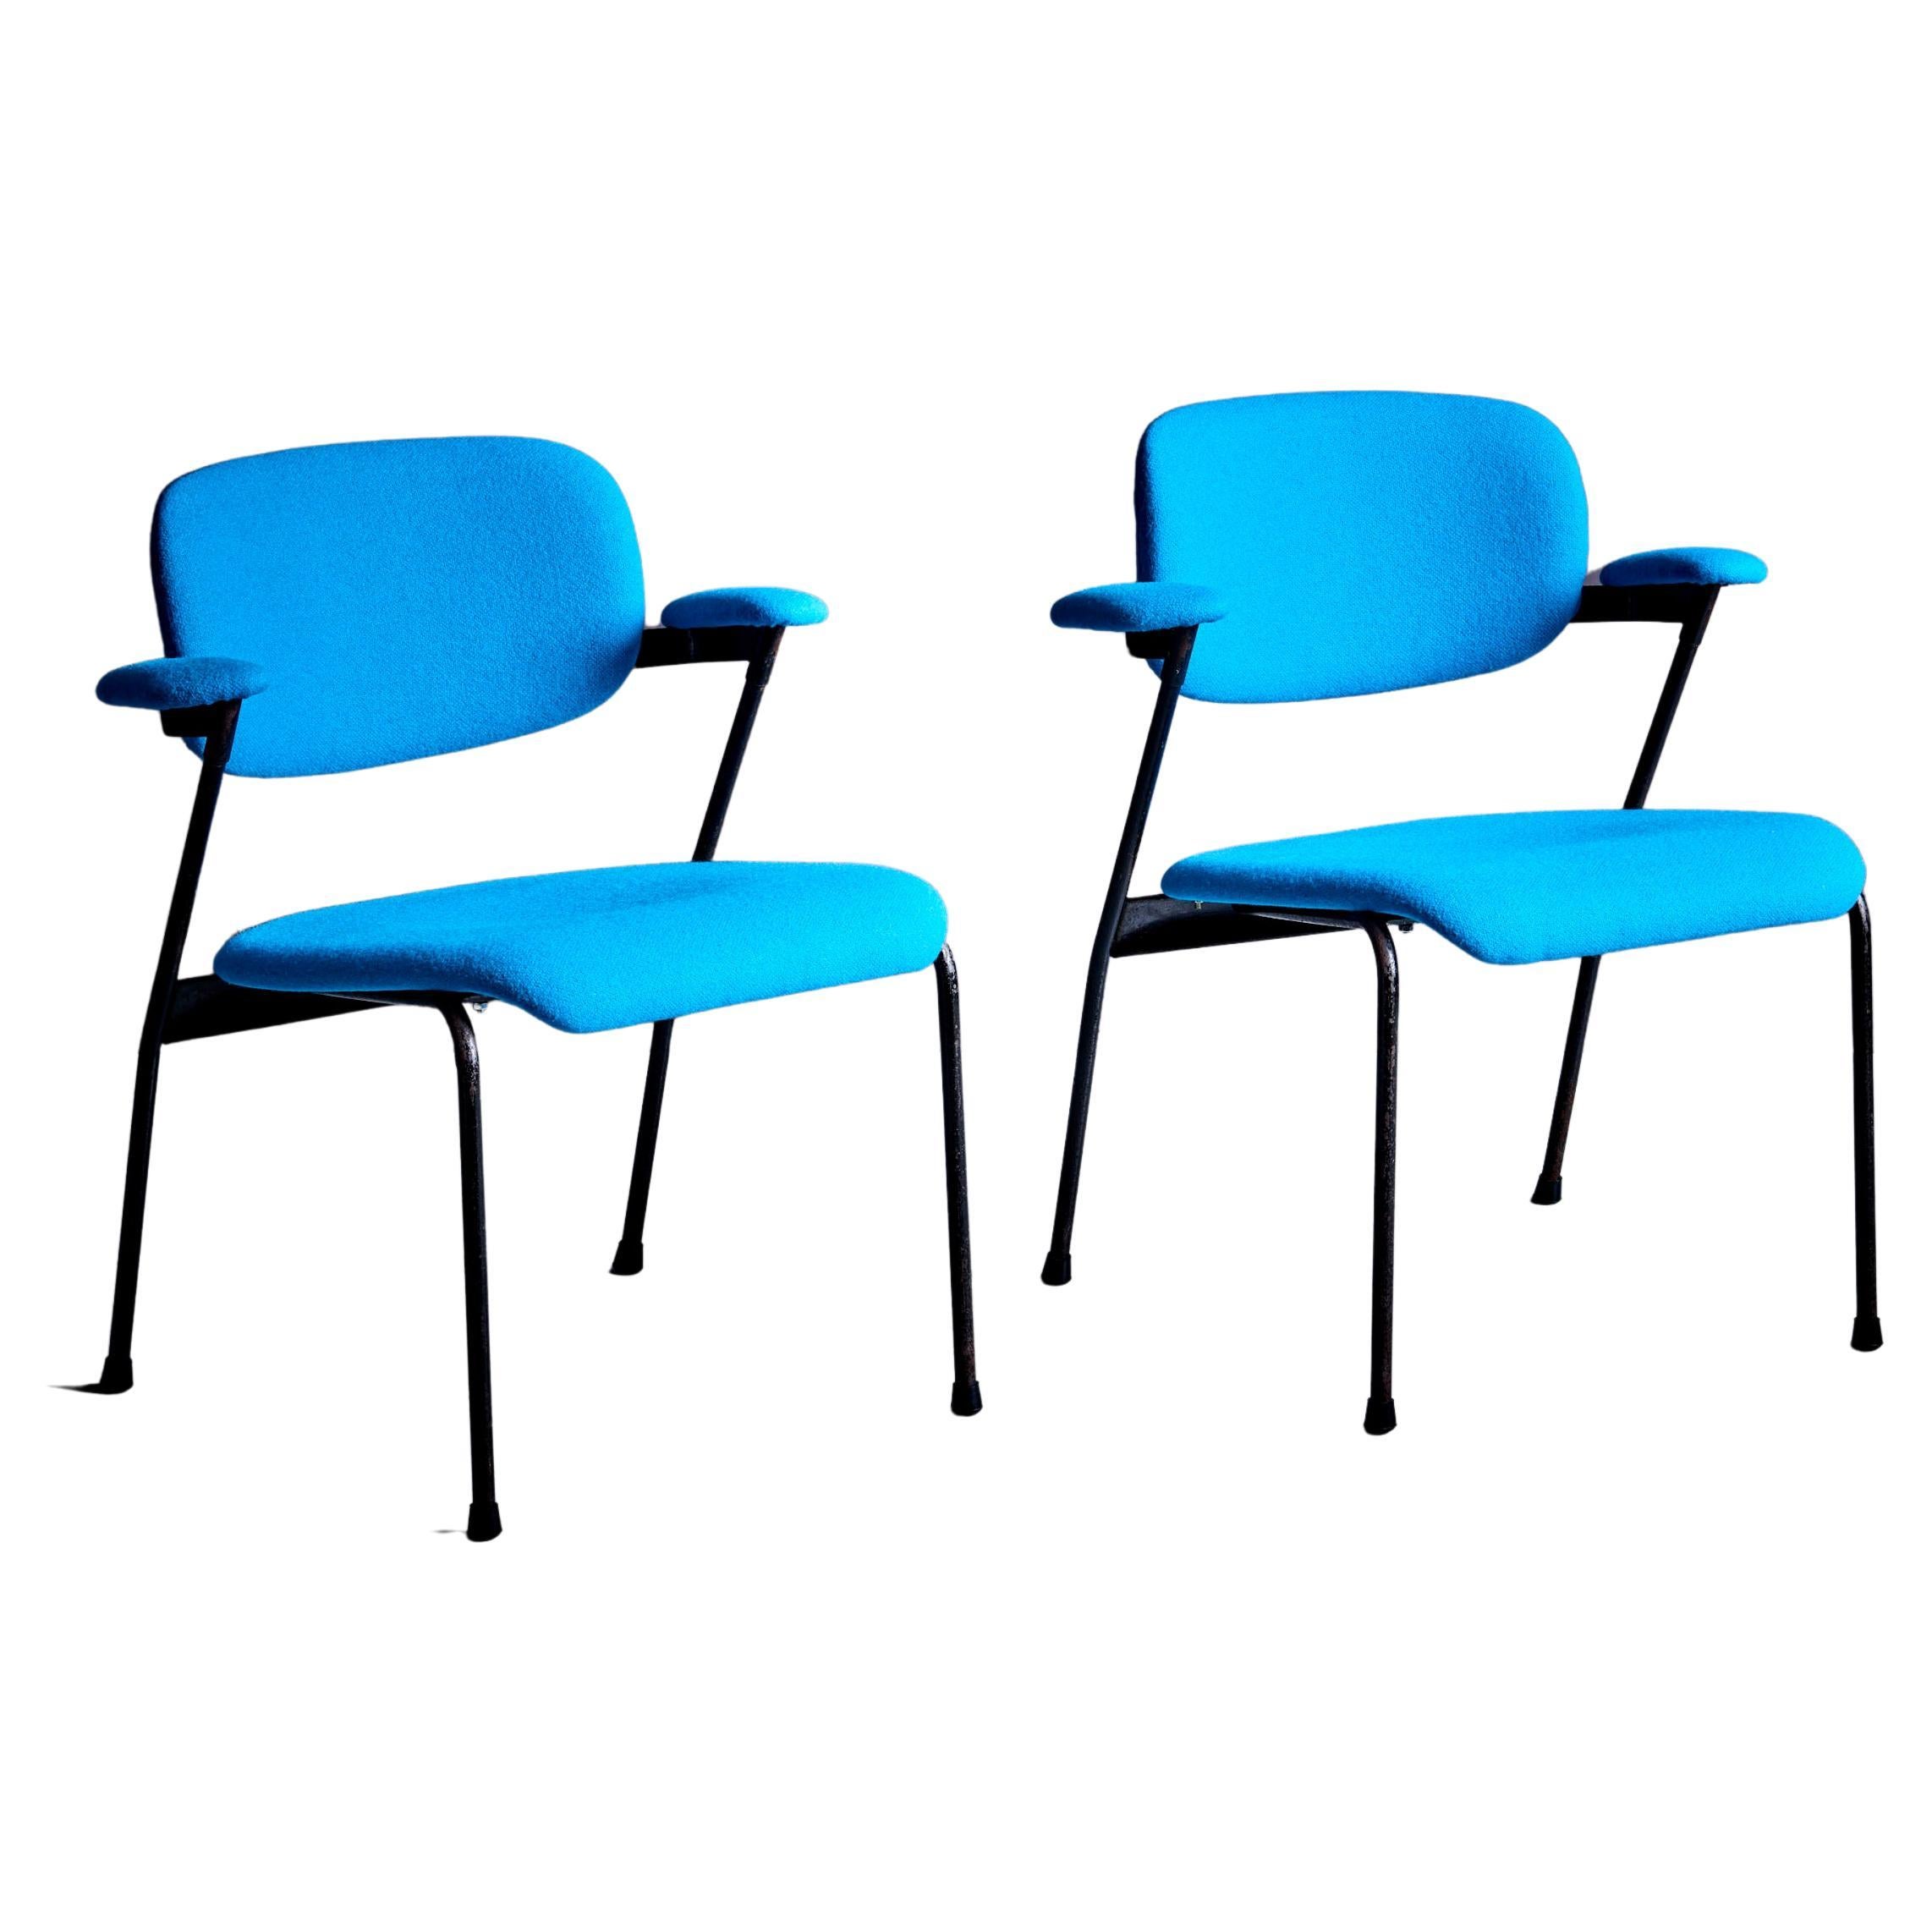 Willy van der Meeren for Tubax Pair of Lounge Chairs in blue For Sale